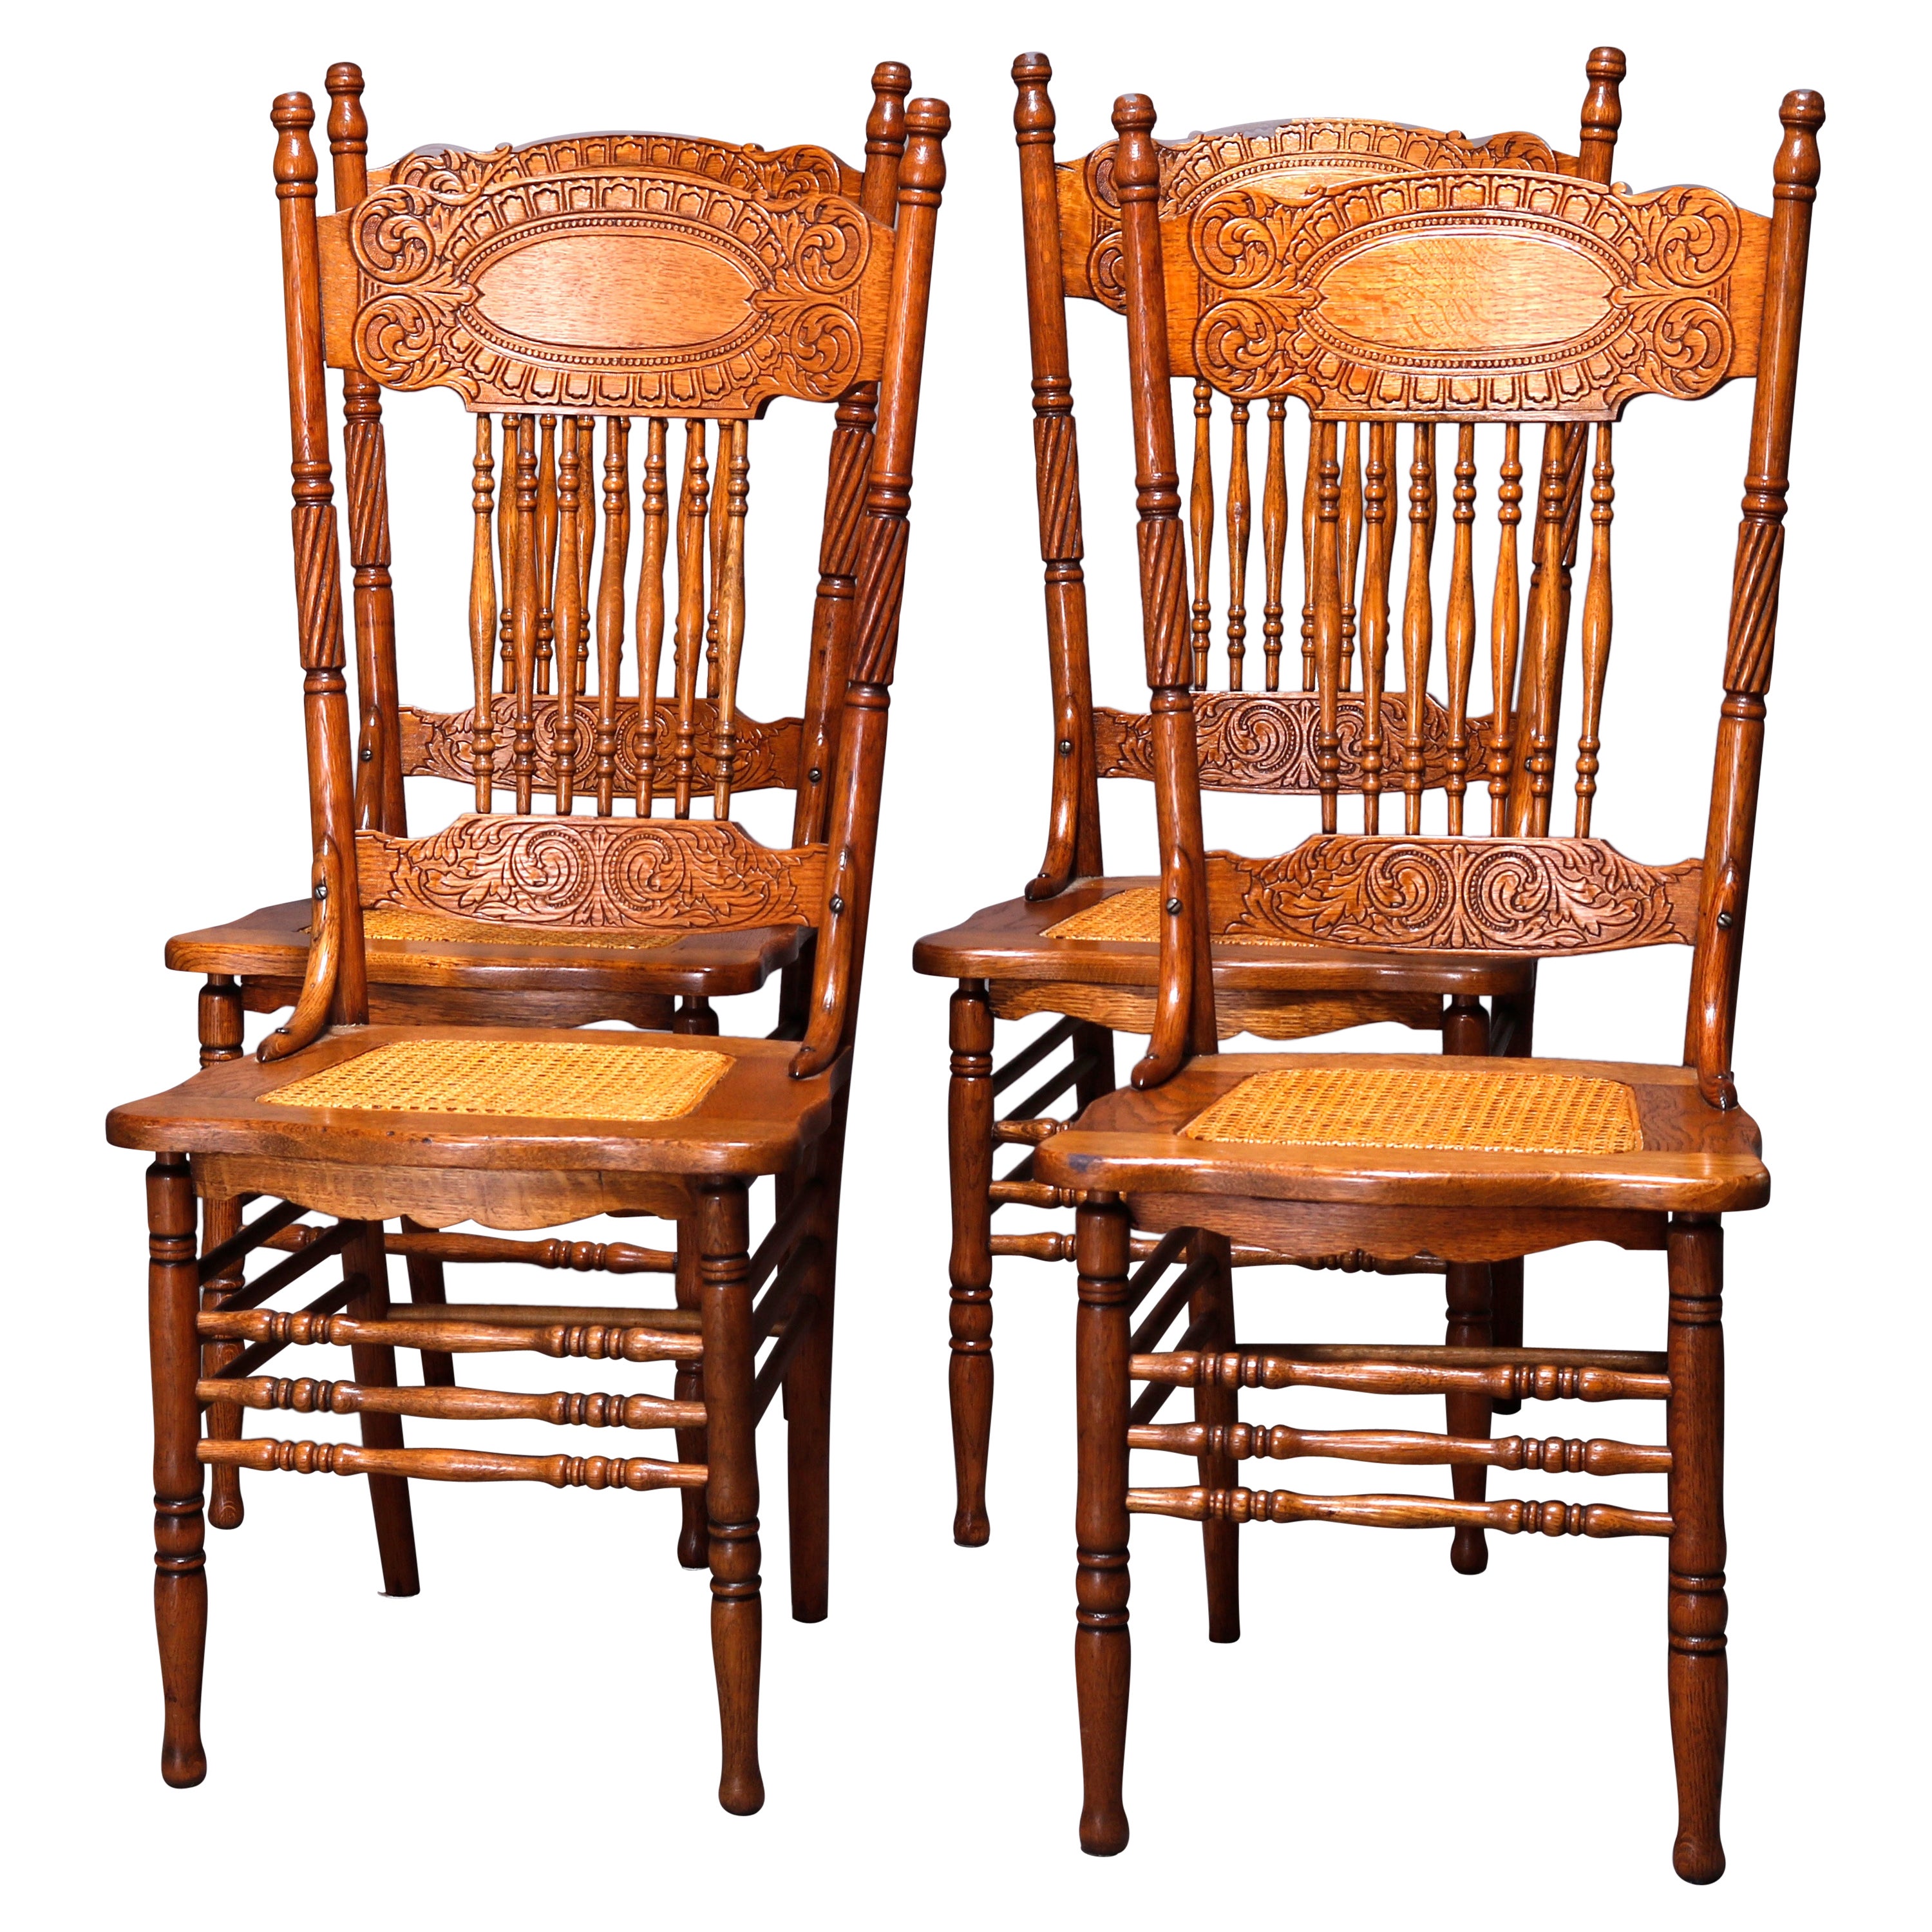 Four Antique Larkin No. 1 Double Pressed Back Oak Dining Chairs, c1910